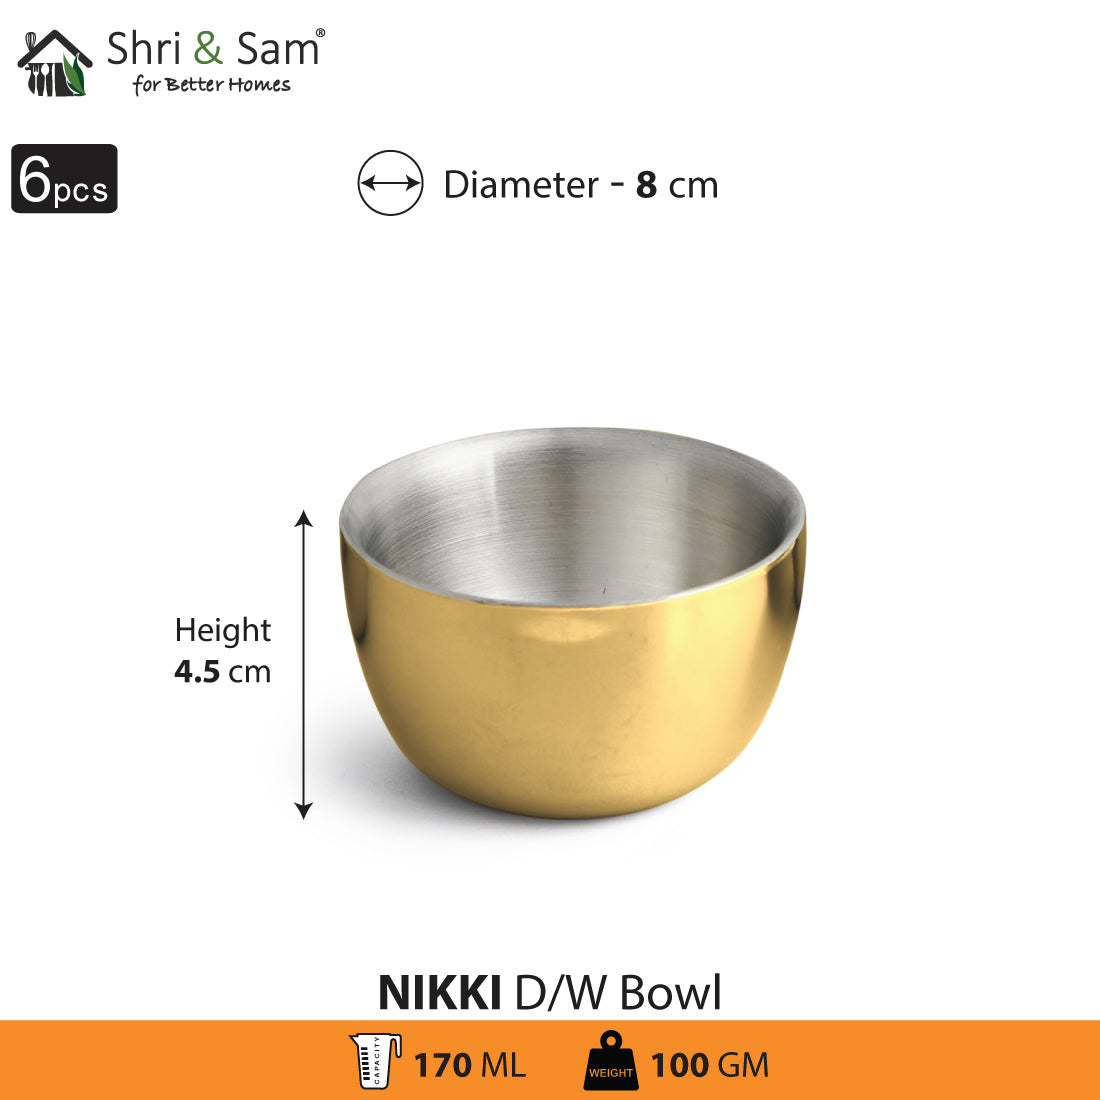 Stainless Steel 6 PCS Double Wall Bowl with Gold PVD Coating Nikki